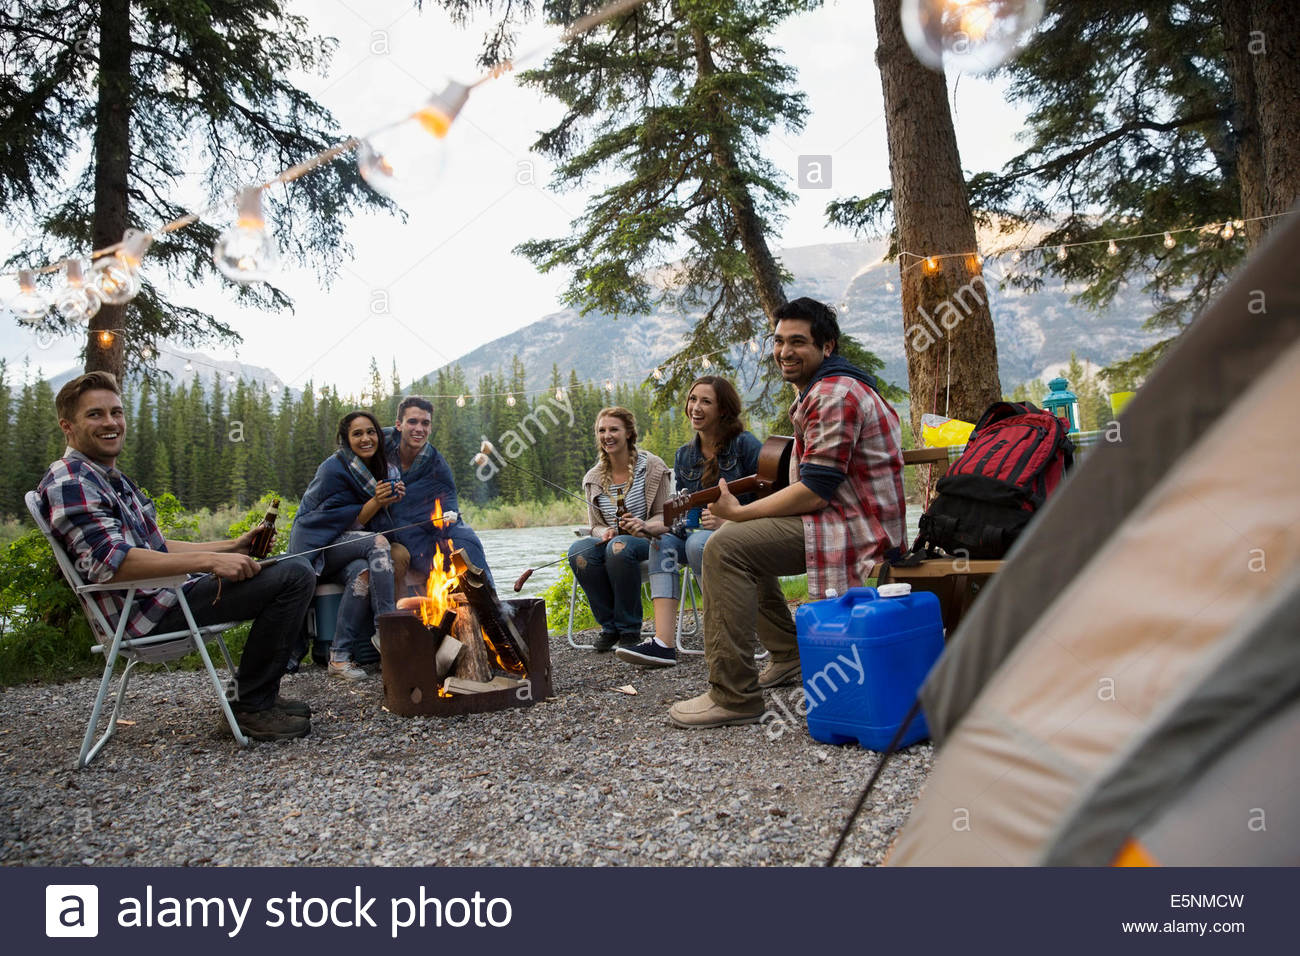 Friends hanging out around campfire at campsite Stock Photo